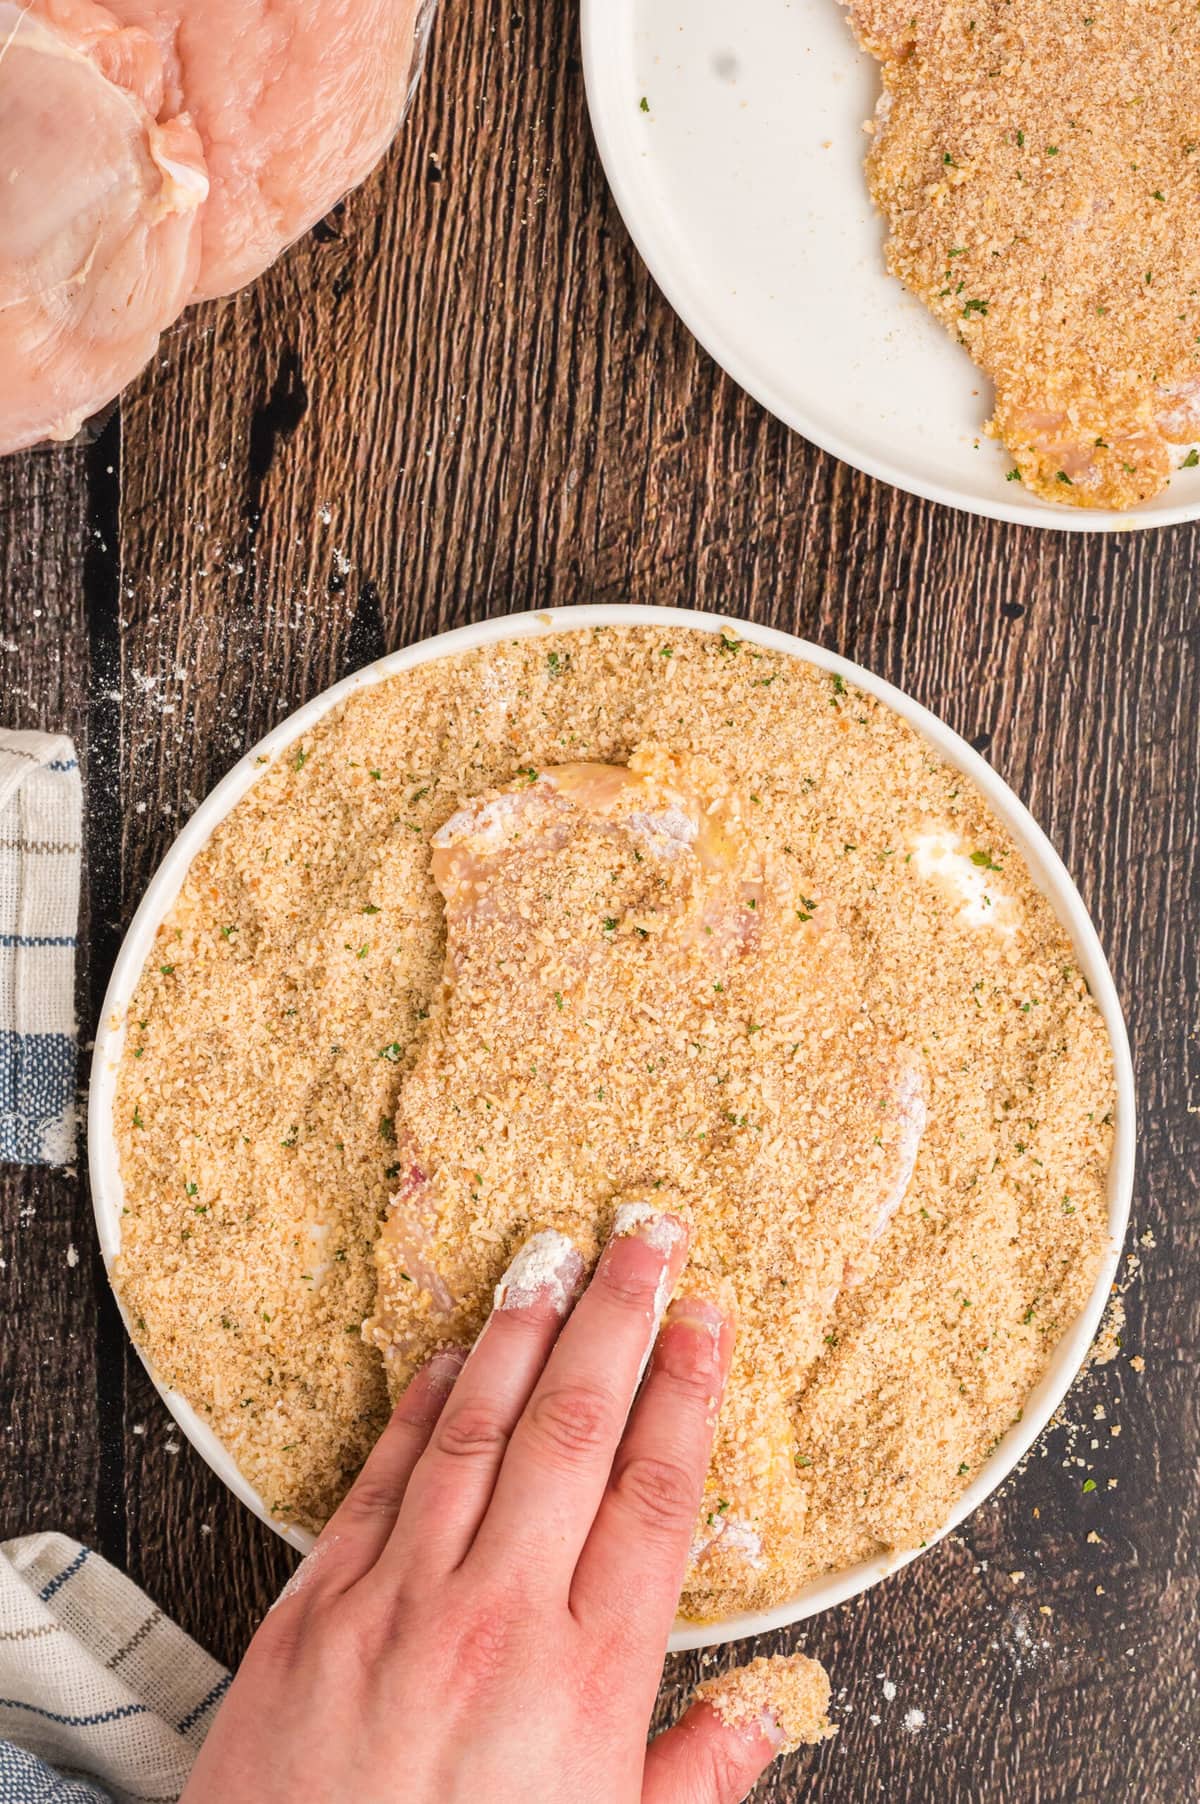 Hands dipping a chicken breast in breadcrumbs